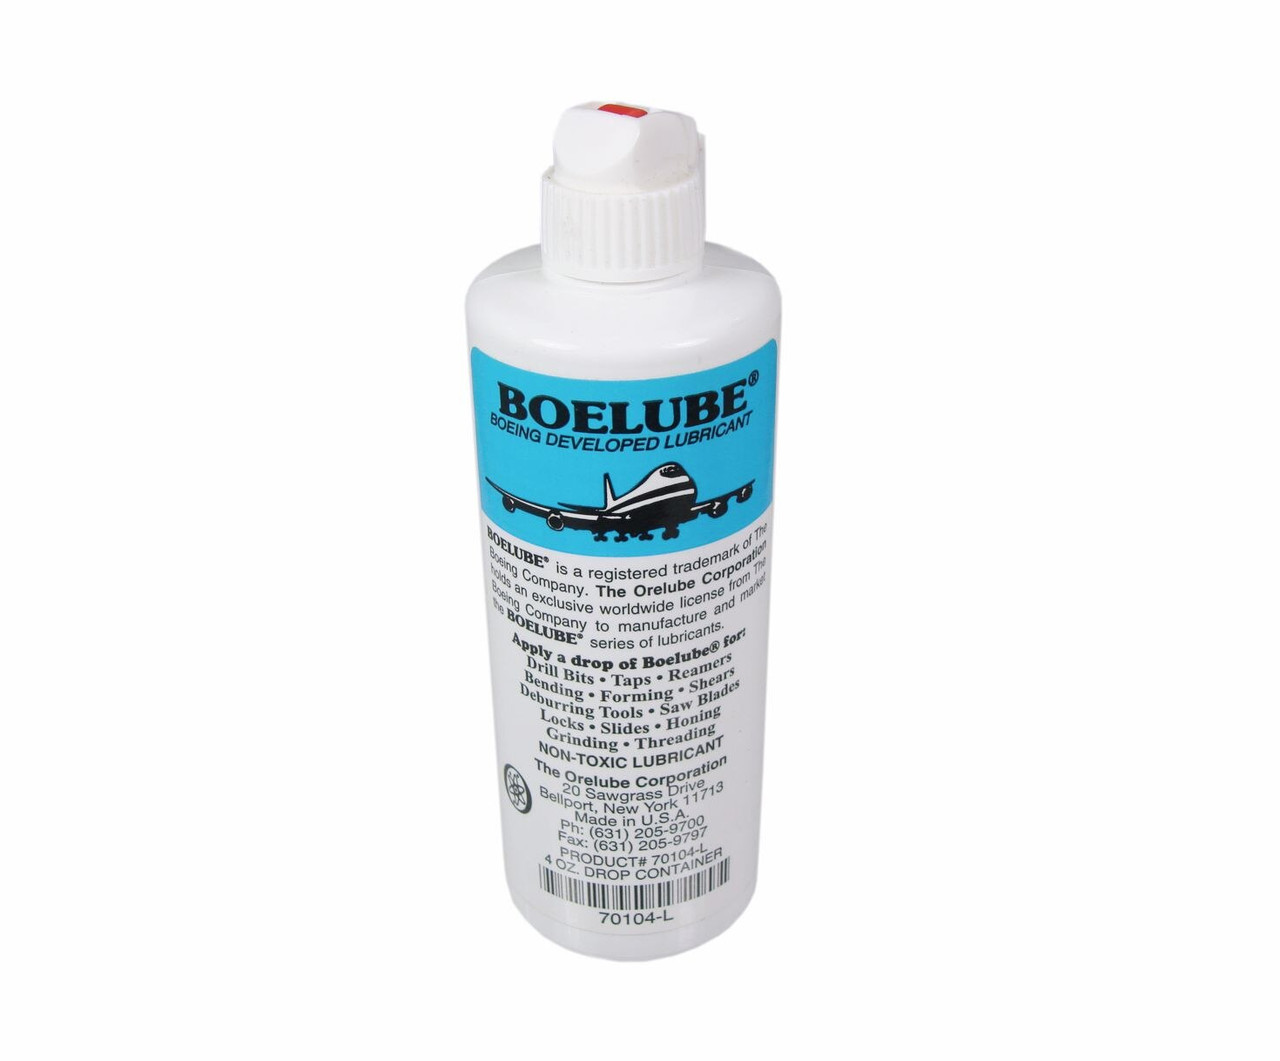 Flashlube Silicone Oil - Genuine Flashlube™ fuel additives Synthetic  lubricants for the automotive industry